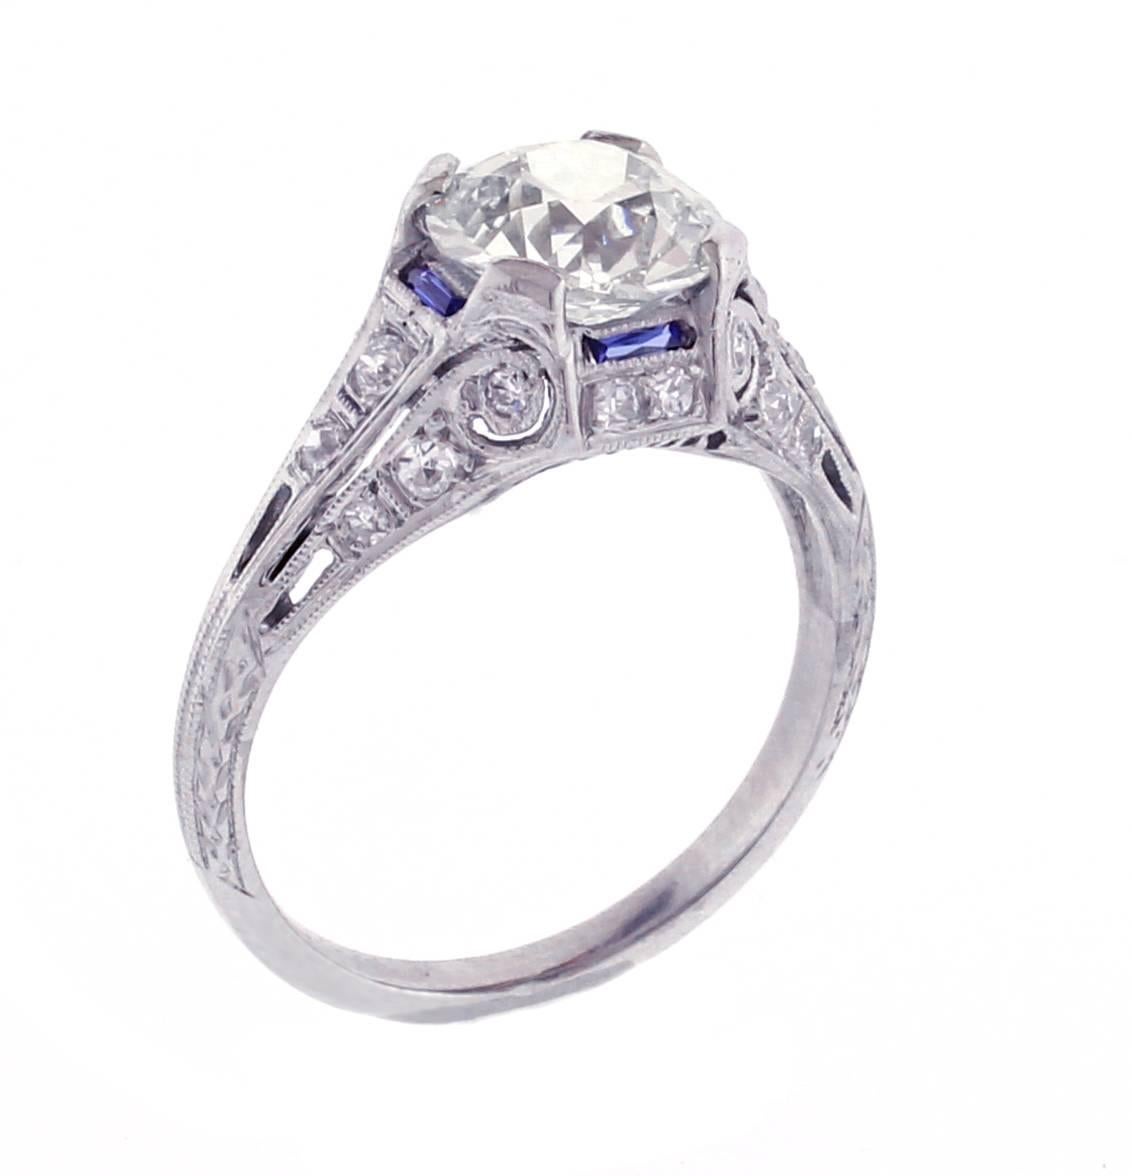 Neoclassical design motifs distinguishes this refined Art Deco  diamond engagement ring. Hand-fabricated in platinum with hand-pierced and engraved details - circa 1920s-30s. Featuring a gorgeous brilliant European-cut diamond, weighing 1.97 carats,